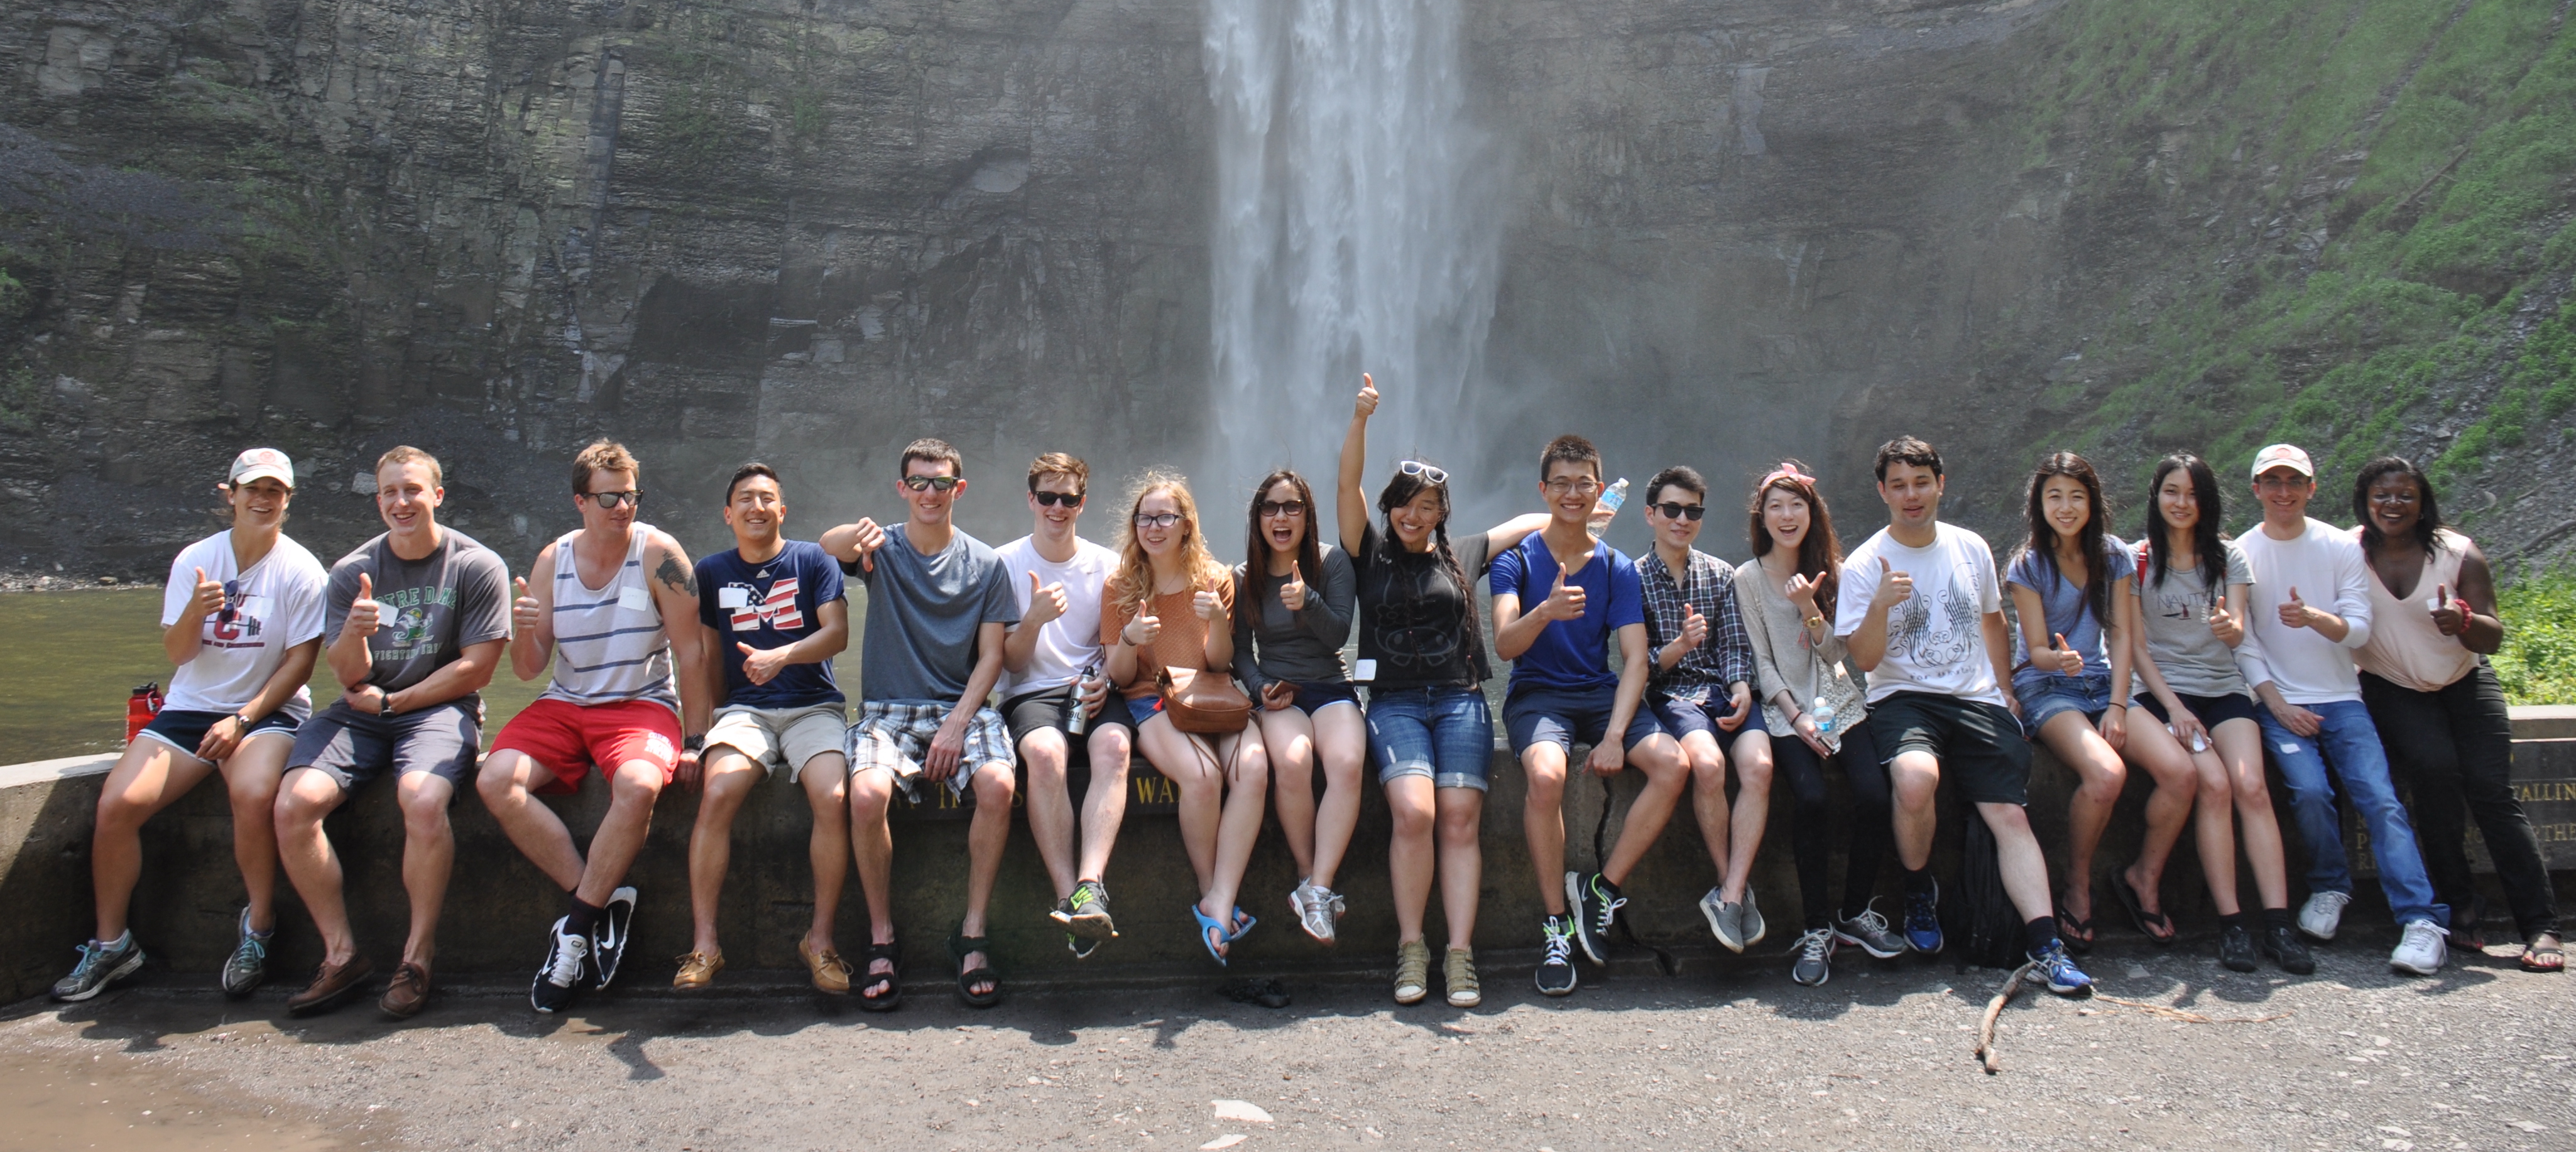 Cornell students at Taughannock Falls